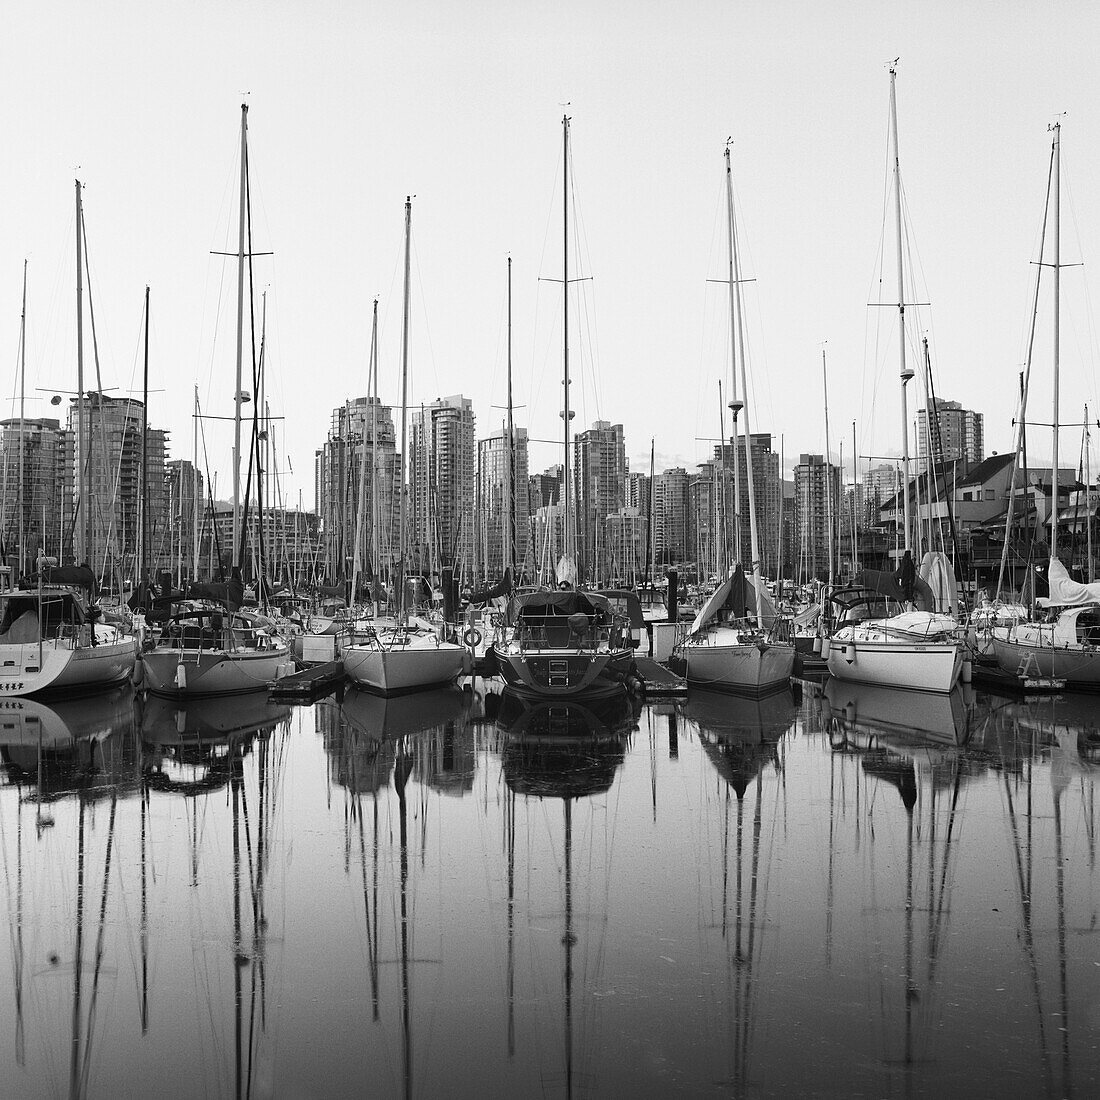 Skyscrapers and boats both reflected in water of marina in Vancouver, British Columbia, Canada